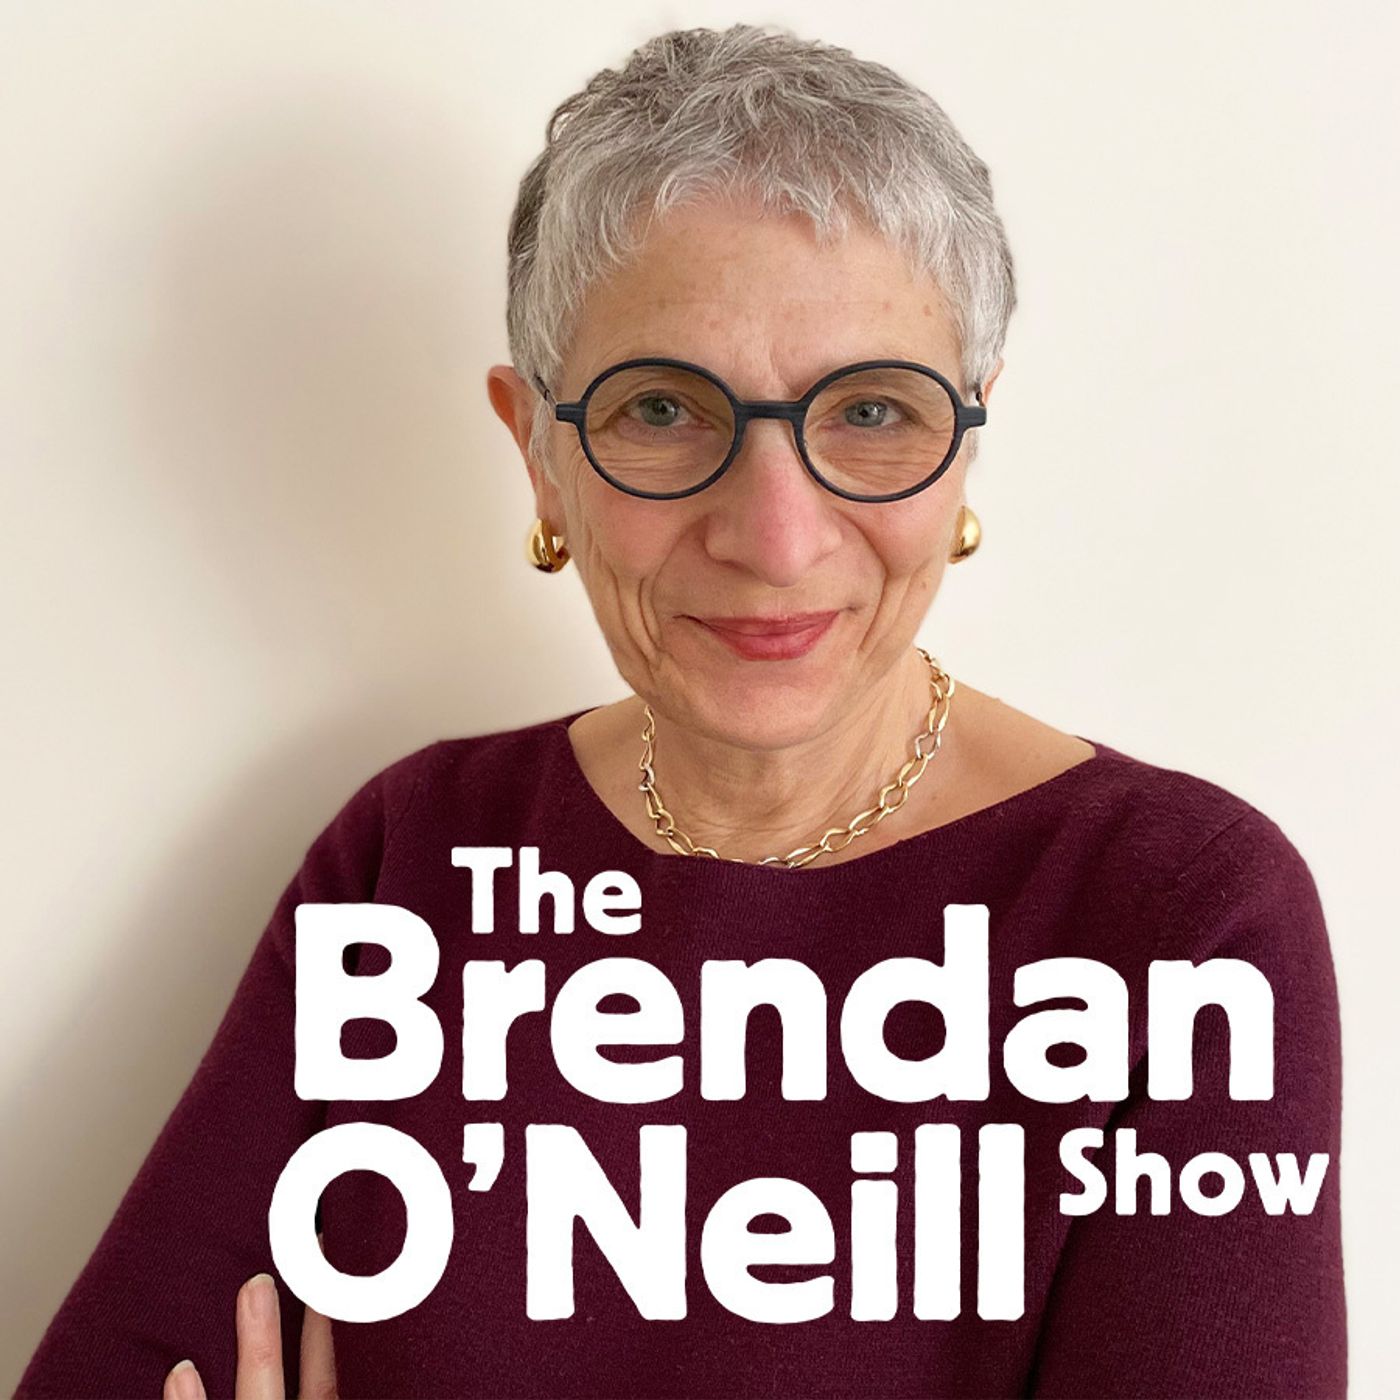 58: The unravelling of the West, with Melanie Phillips